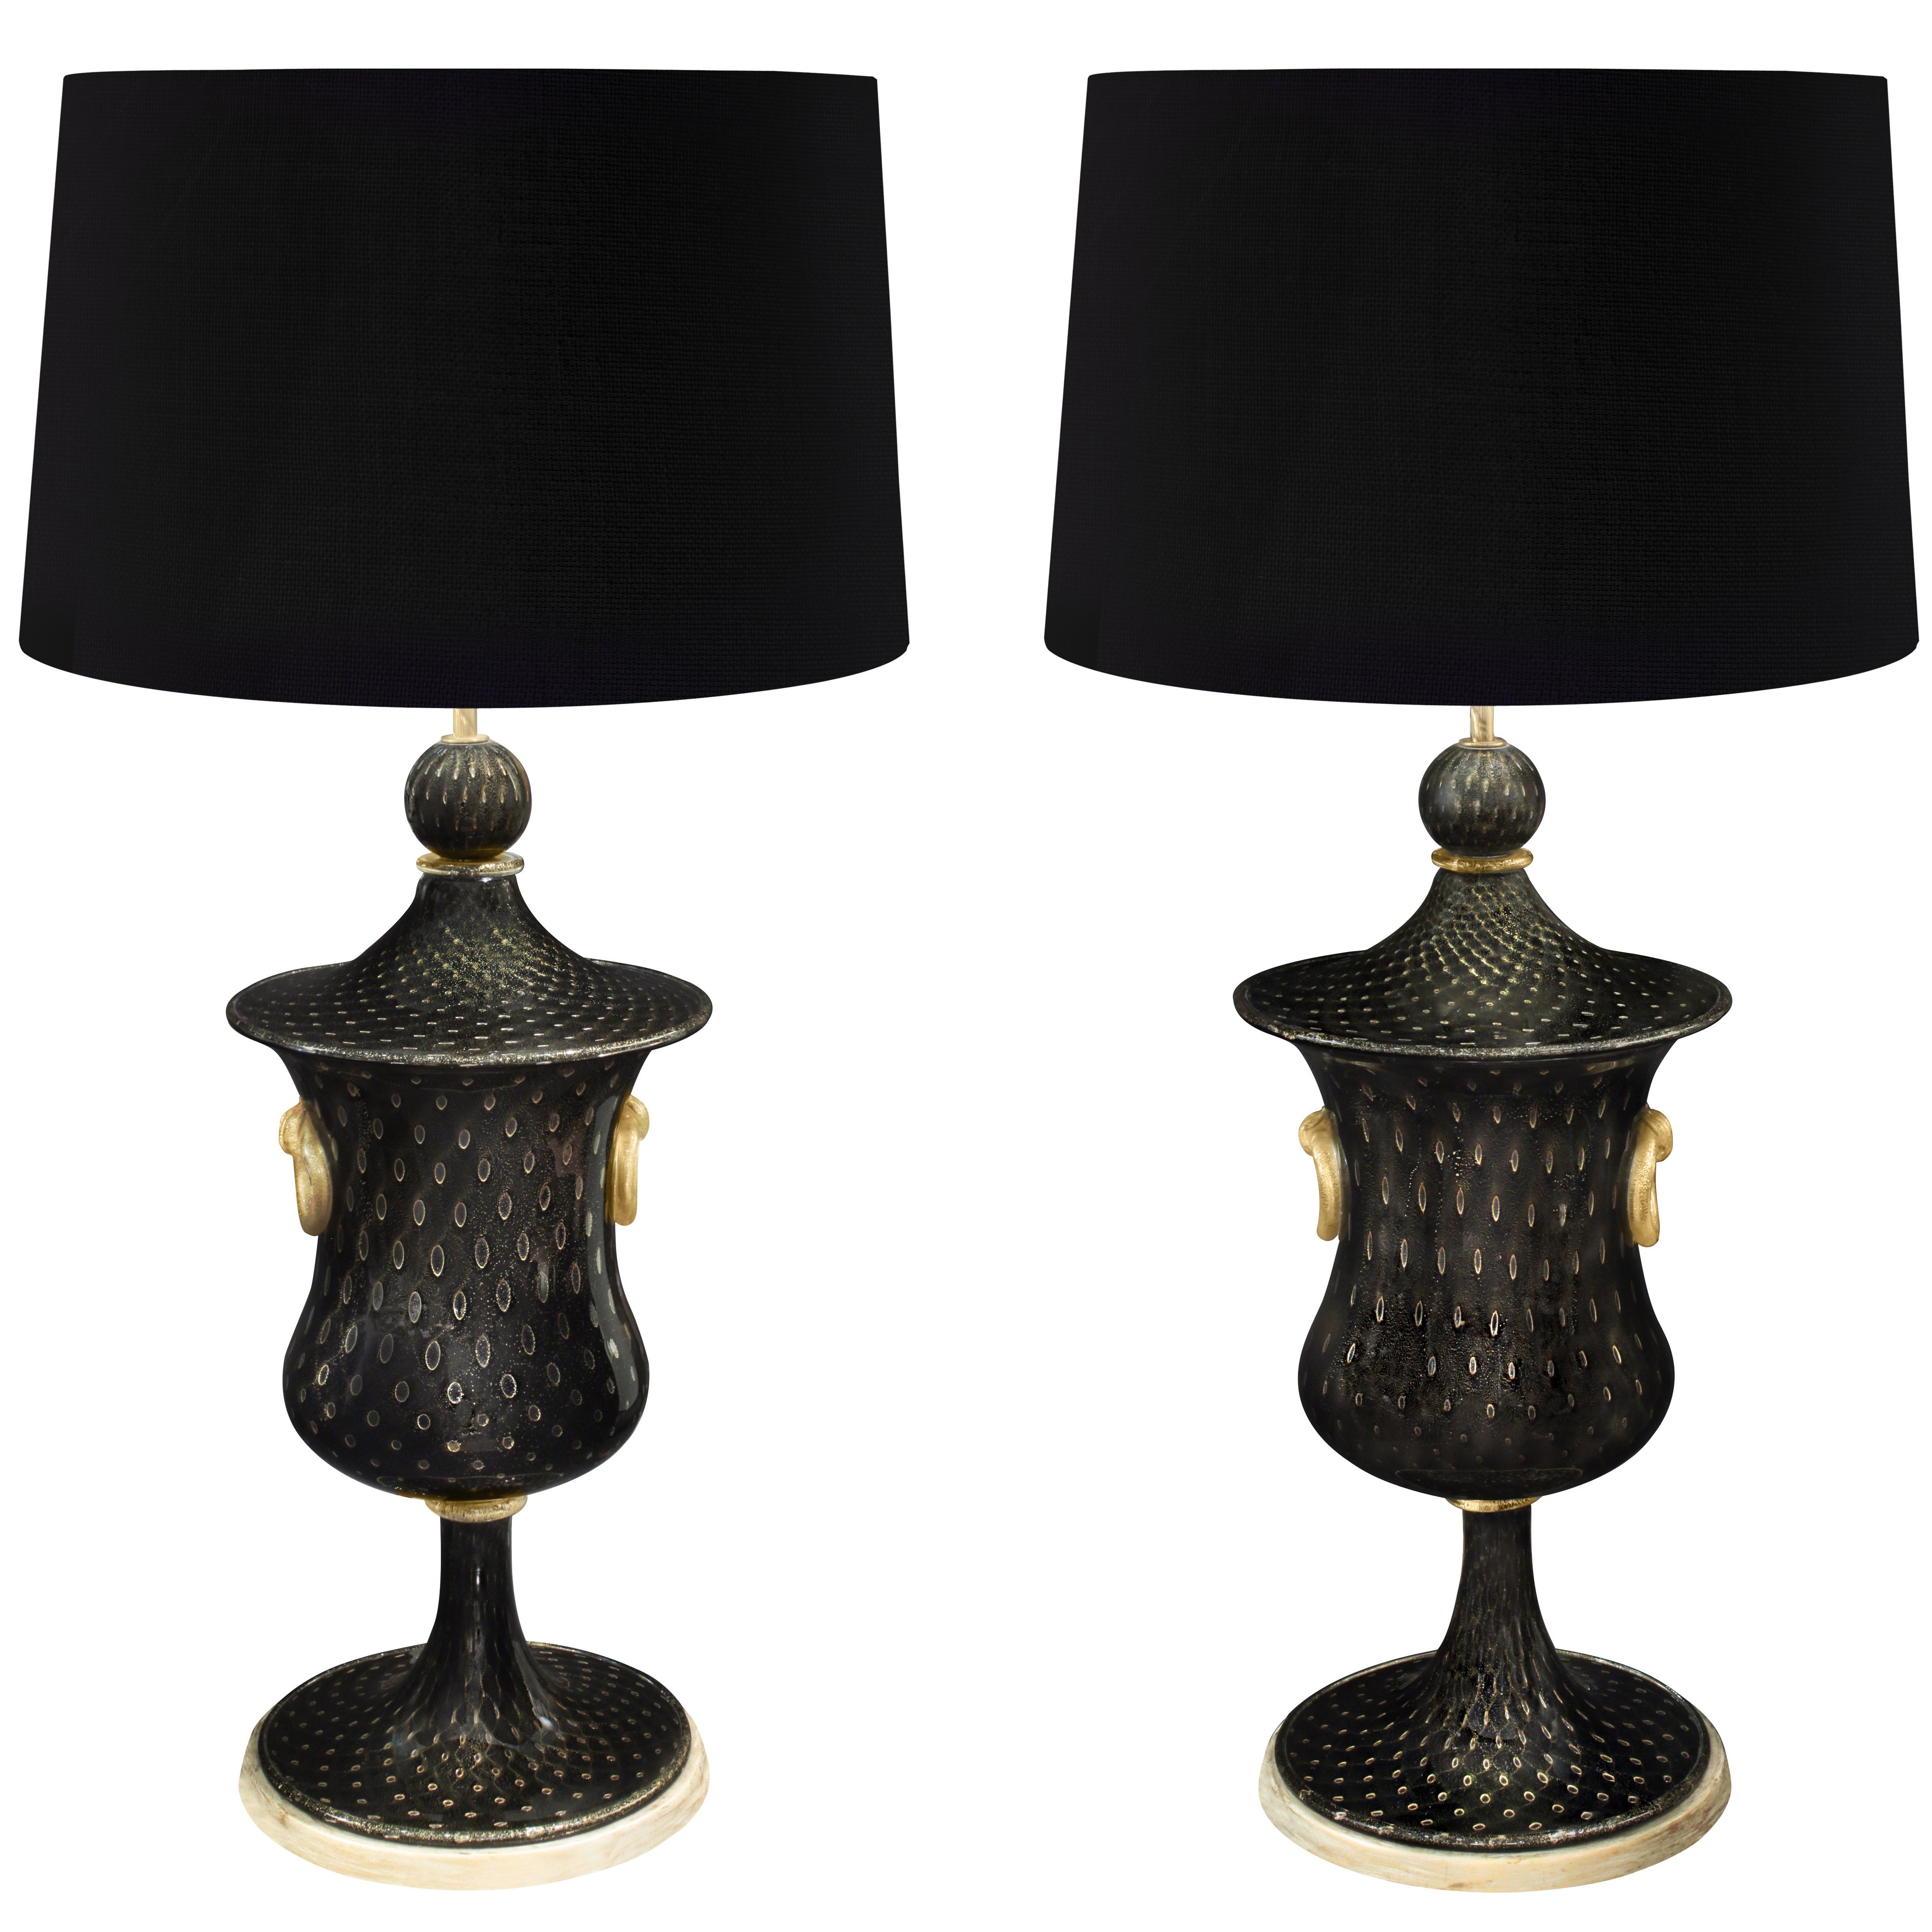 Barovier & Toso Pair of Monumental Handblown Glass Table Lamps, 1940s